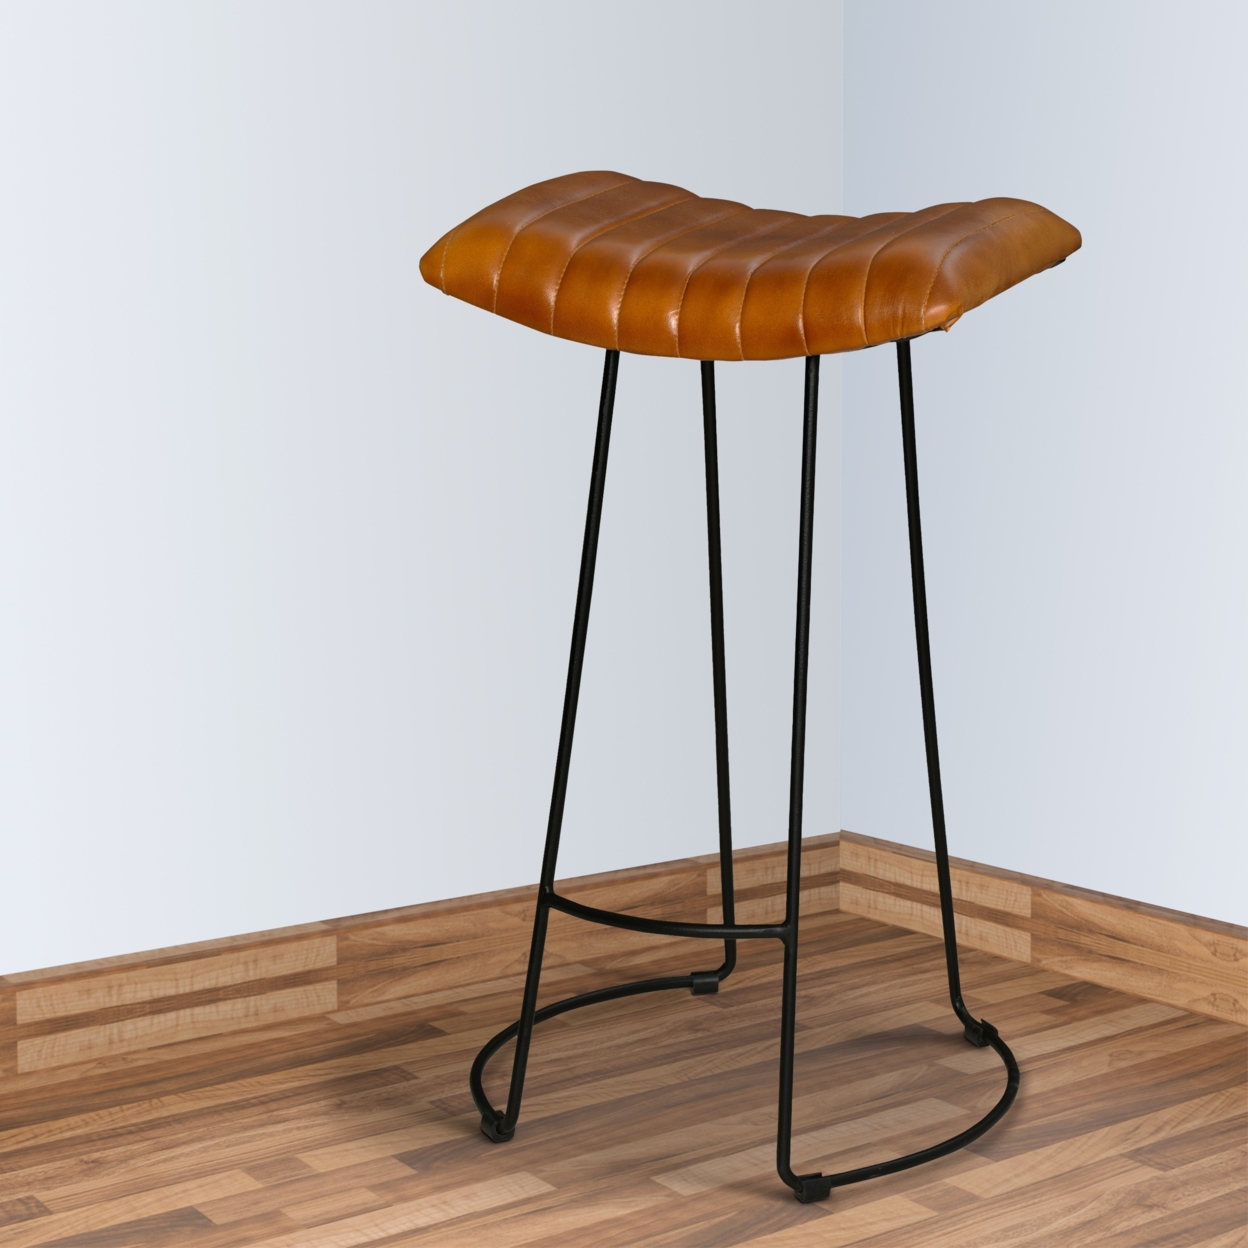 30 Inch Barstool With Curved Genuine Leather Seat And Tubular Frame, Tan Brown And Black- Saltoro Sherpi